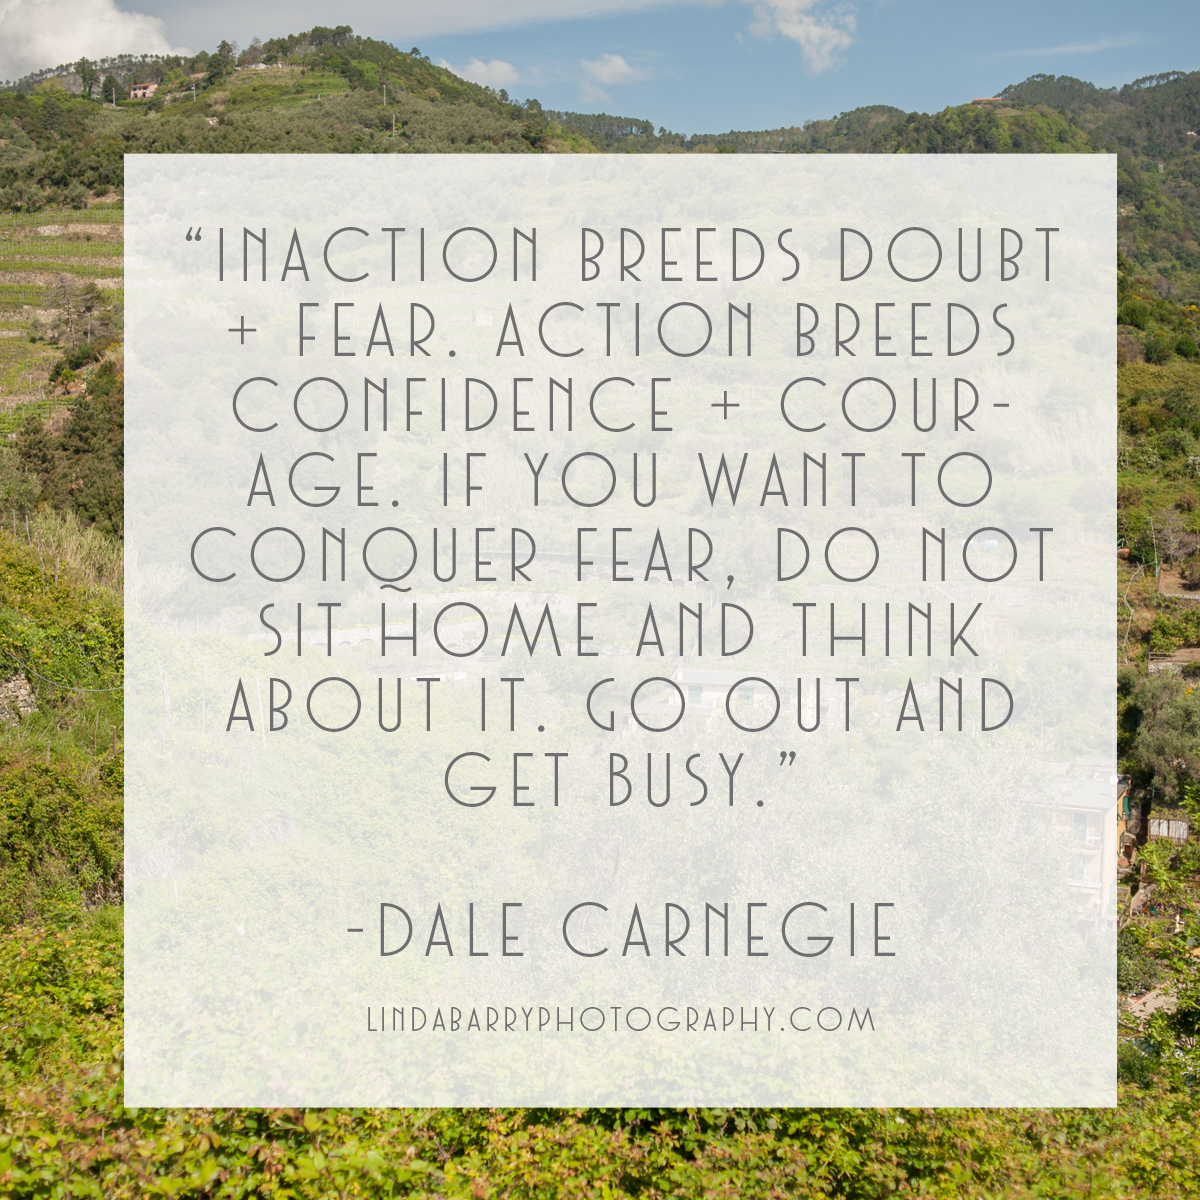 "Inaction breeds doubt + fear. Action breeds confidence + courage. If you want to conquer fear, do not sit home and think about it. Go out and get busy." - Dale Carnegie. See more inspirational quotes here!